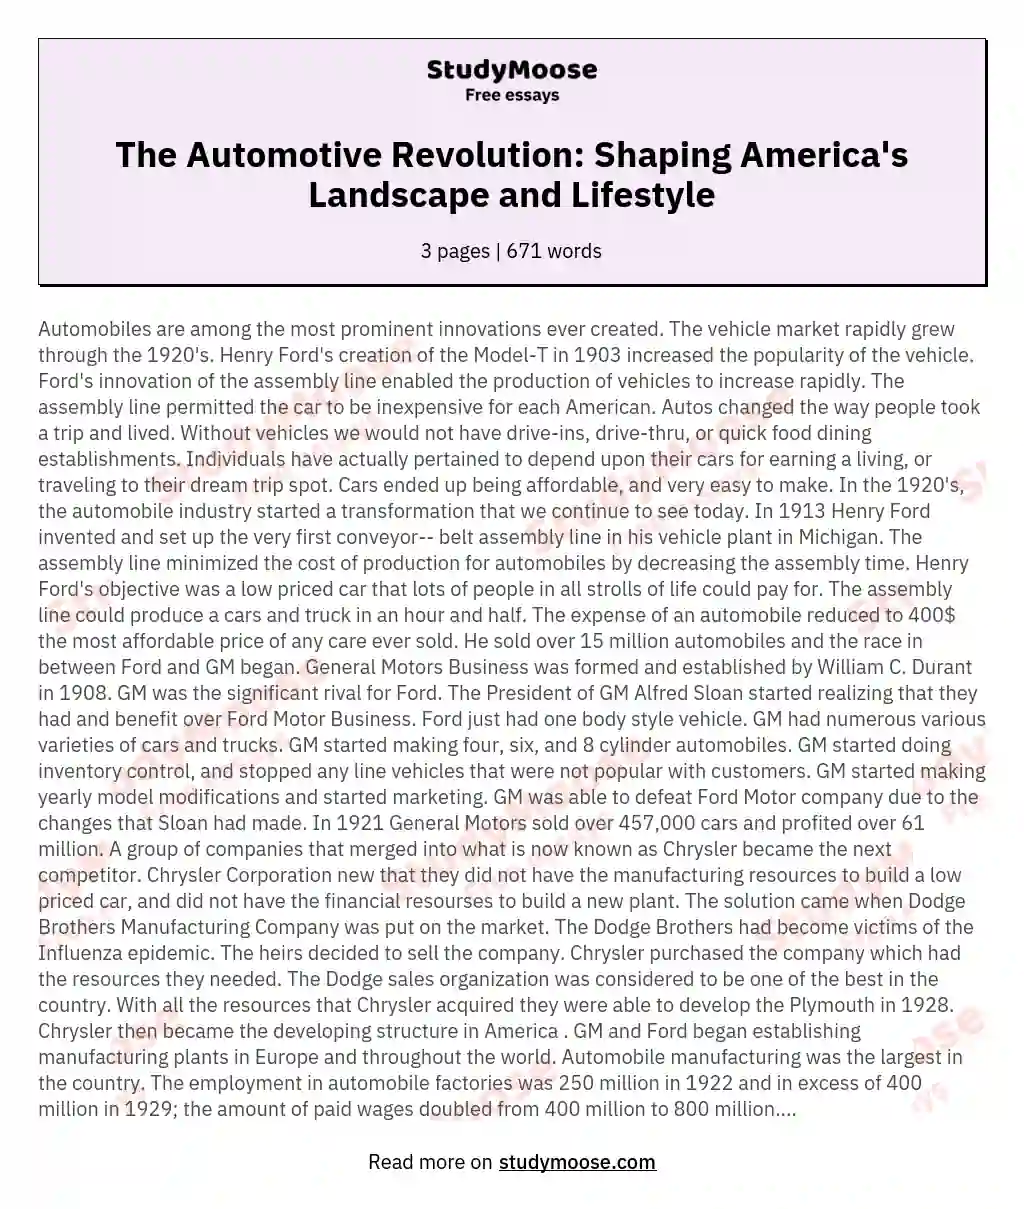 The Automotive Revolution: Shaping America's Landscape and Lifestyle essay